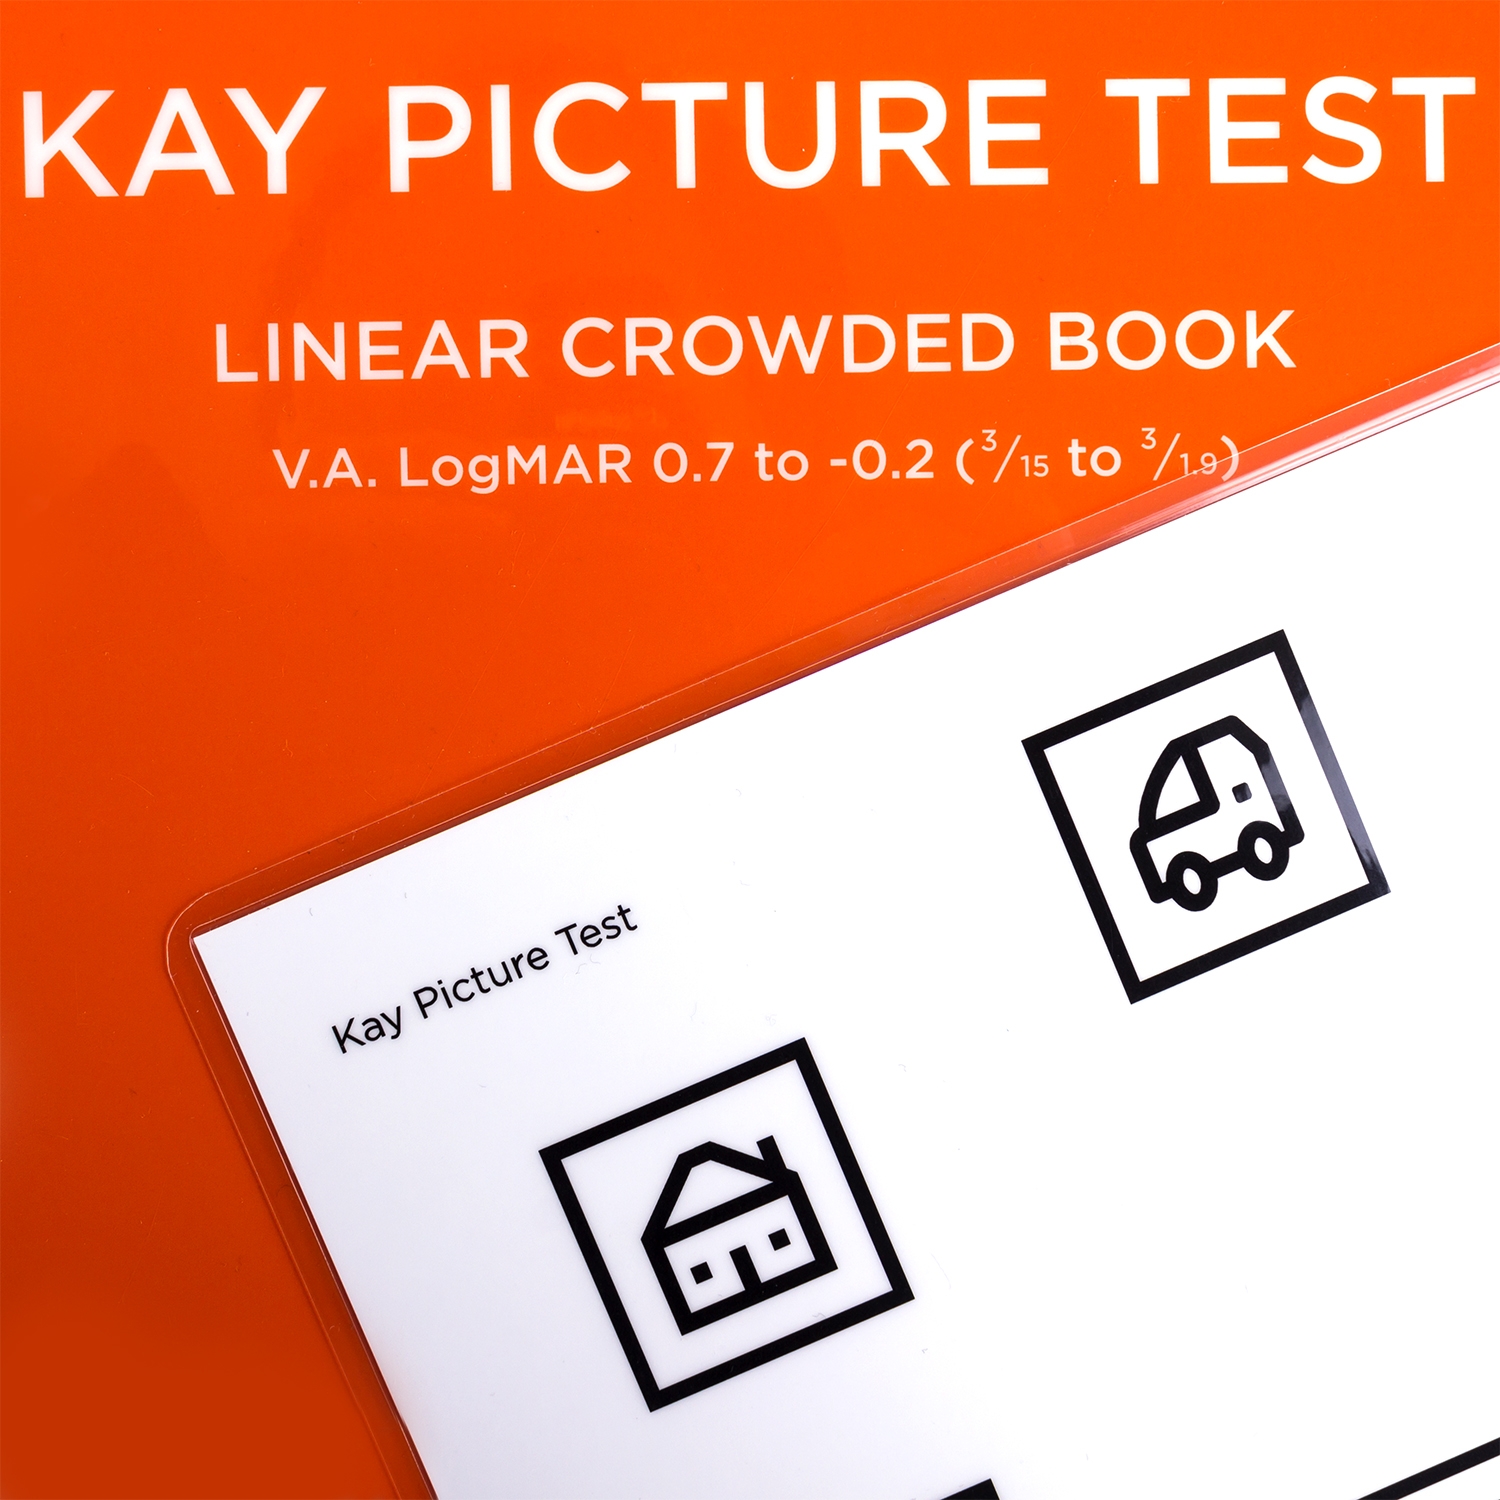 Kay 3m crowded linear book test